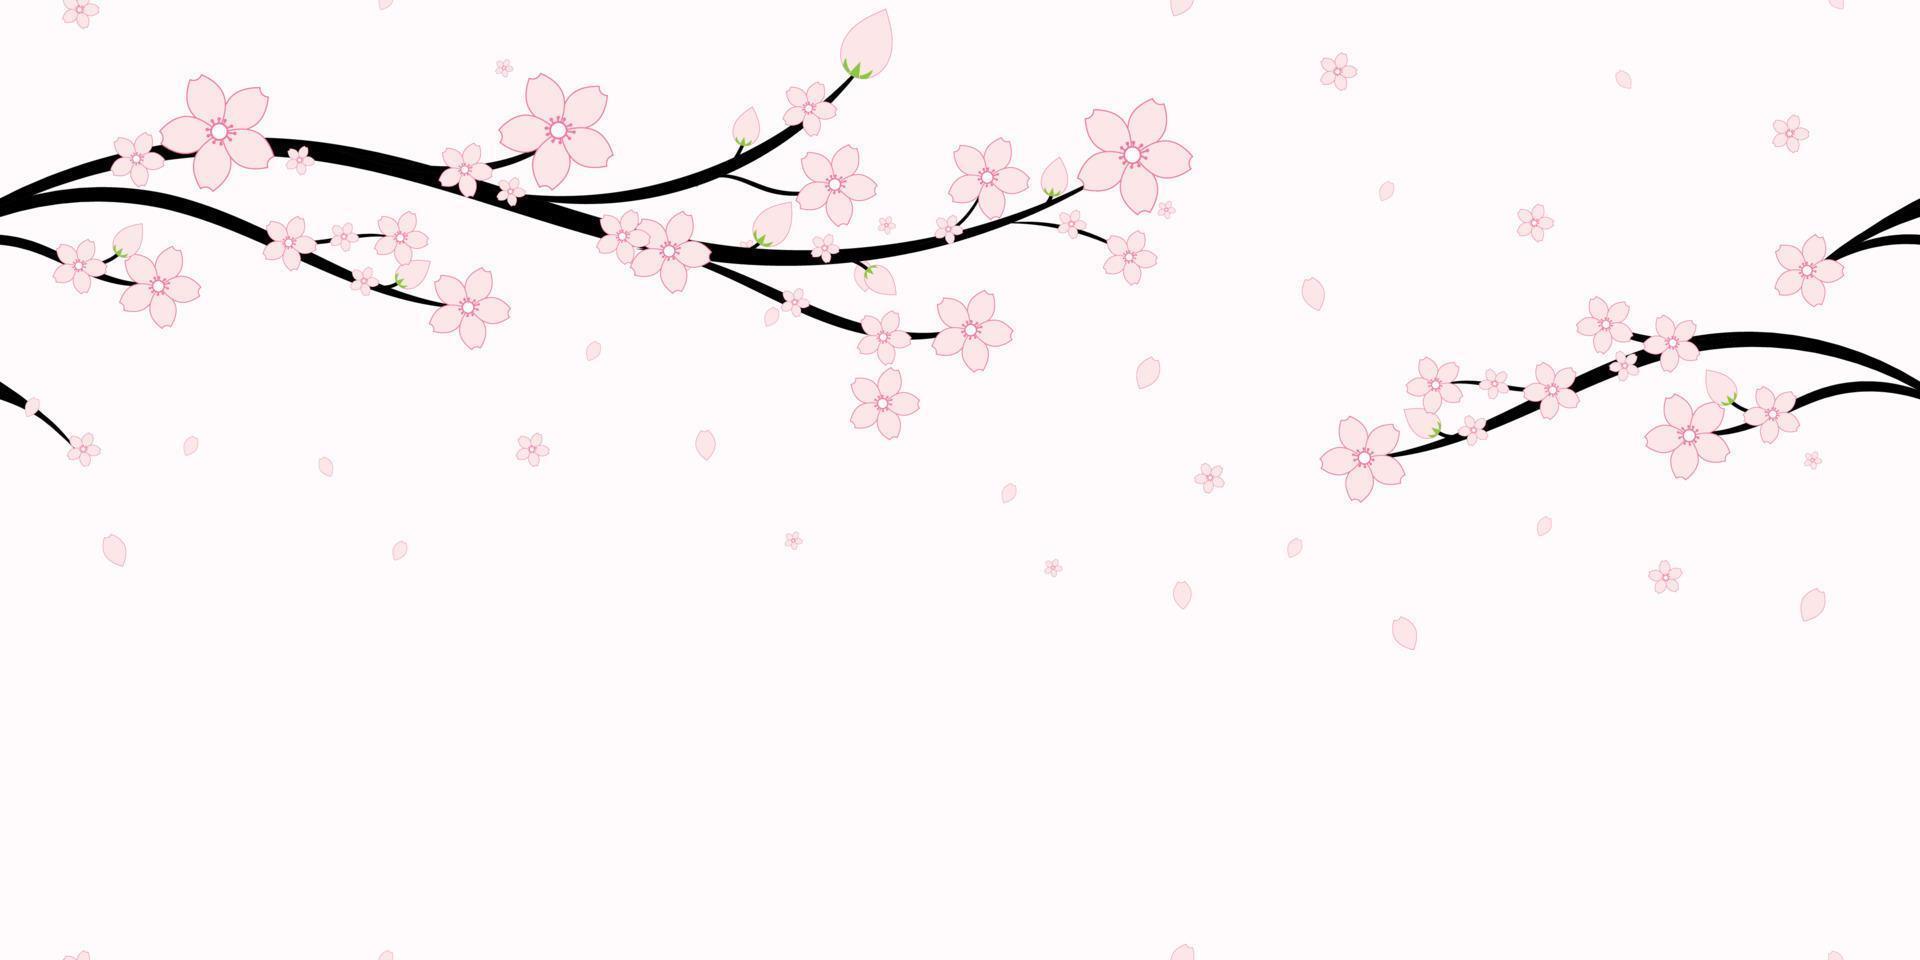 Seamless Japanese Cherry Blossoms and Branches Pattern background, Sakura flower vector illustration, Seamless background and wallpaper for fabric, packaging, Decorative print, Textile